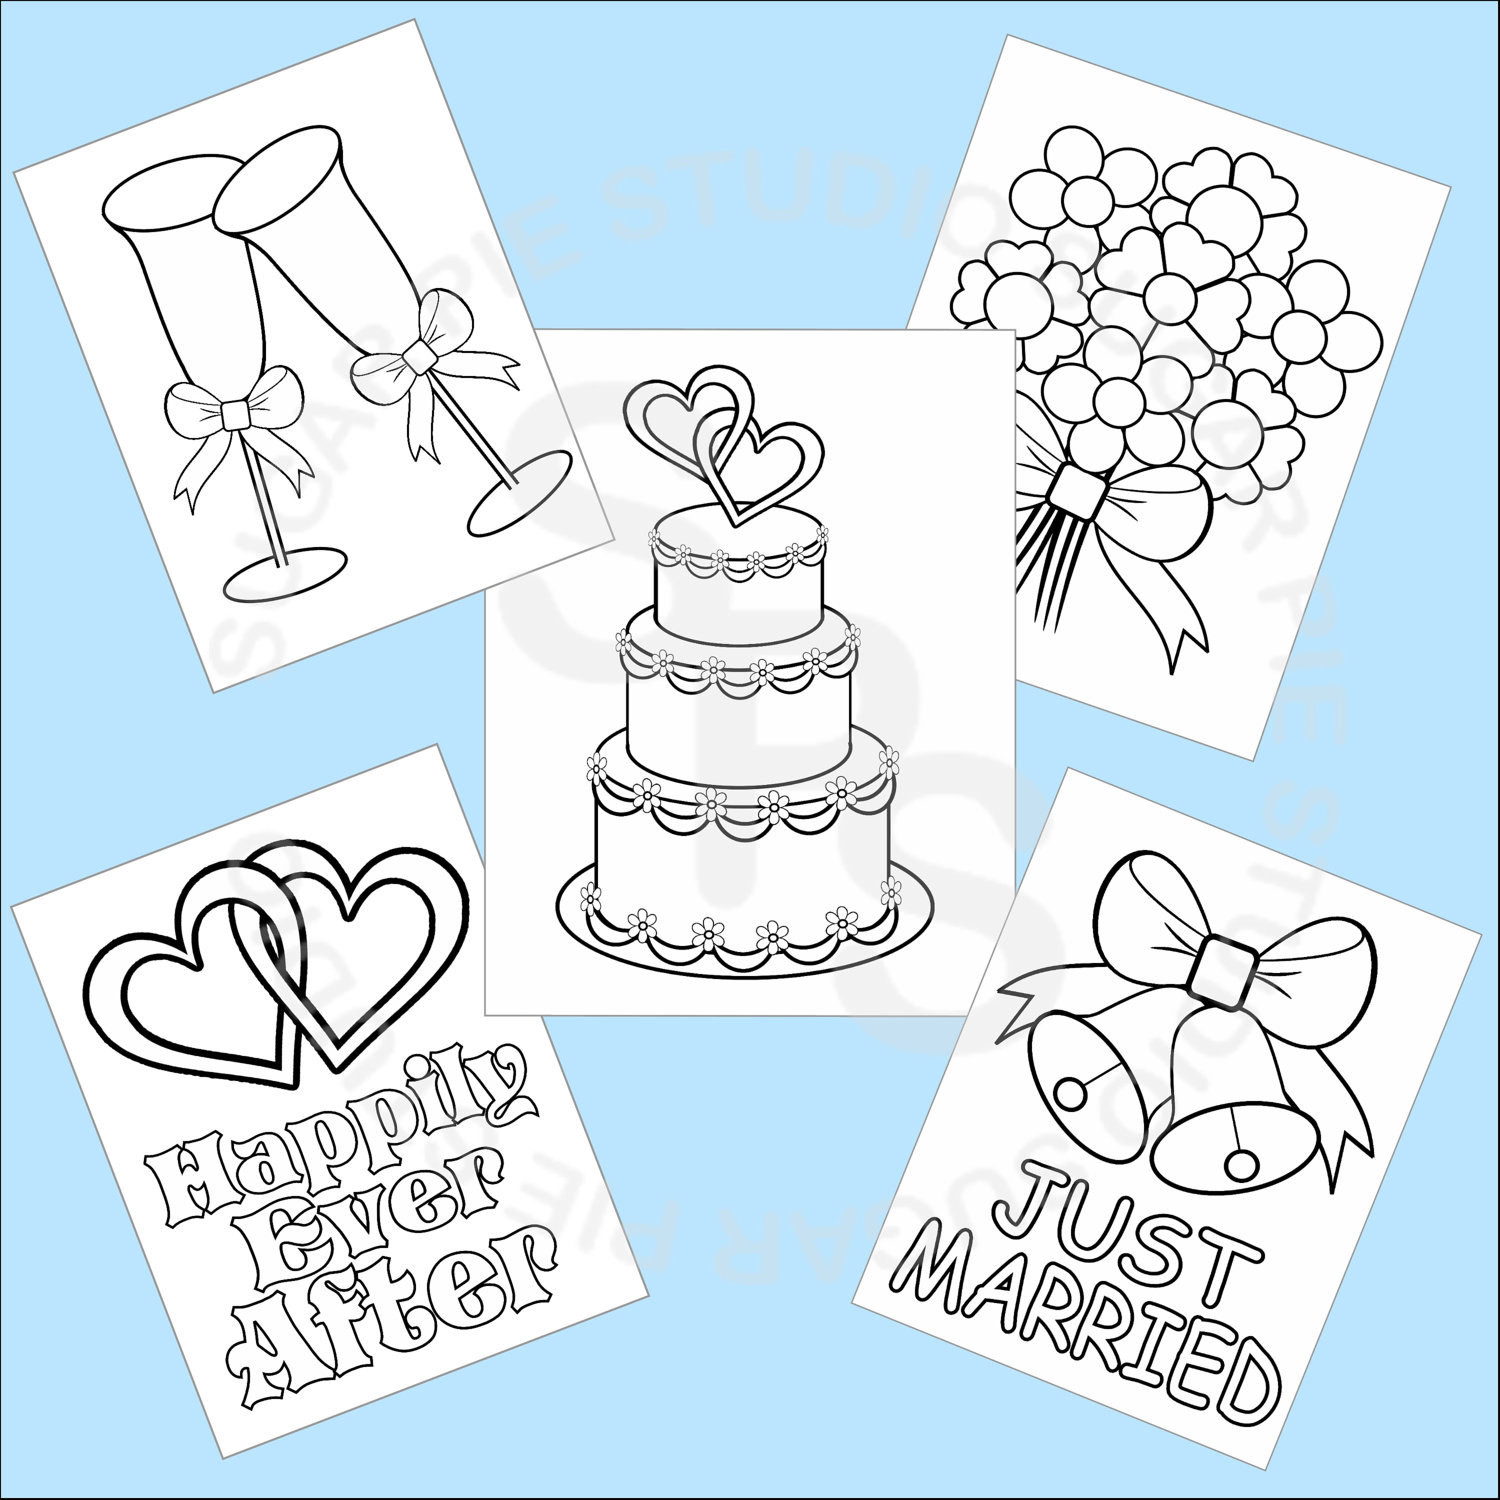 Kids Wedding Coloring Book
 5 Printable Wedding Favor Kids coloring pages by